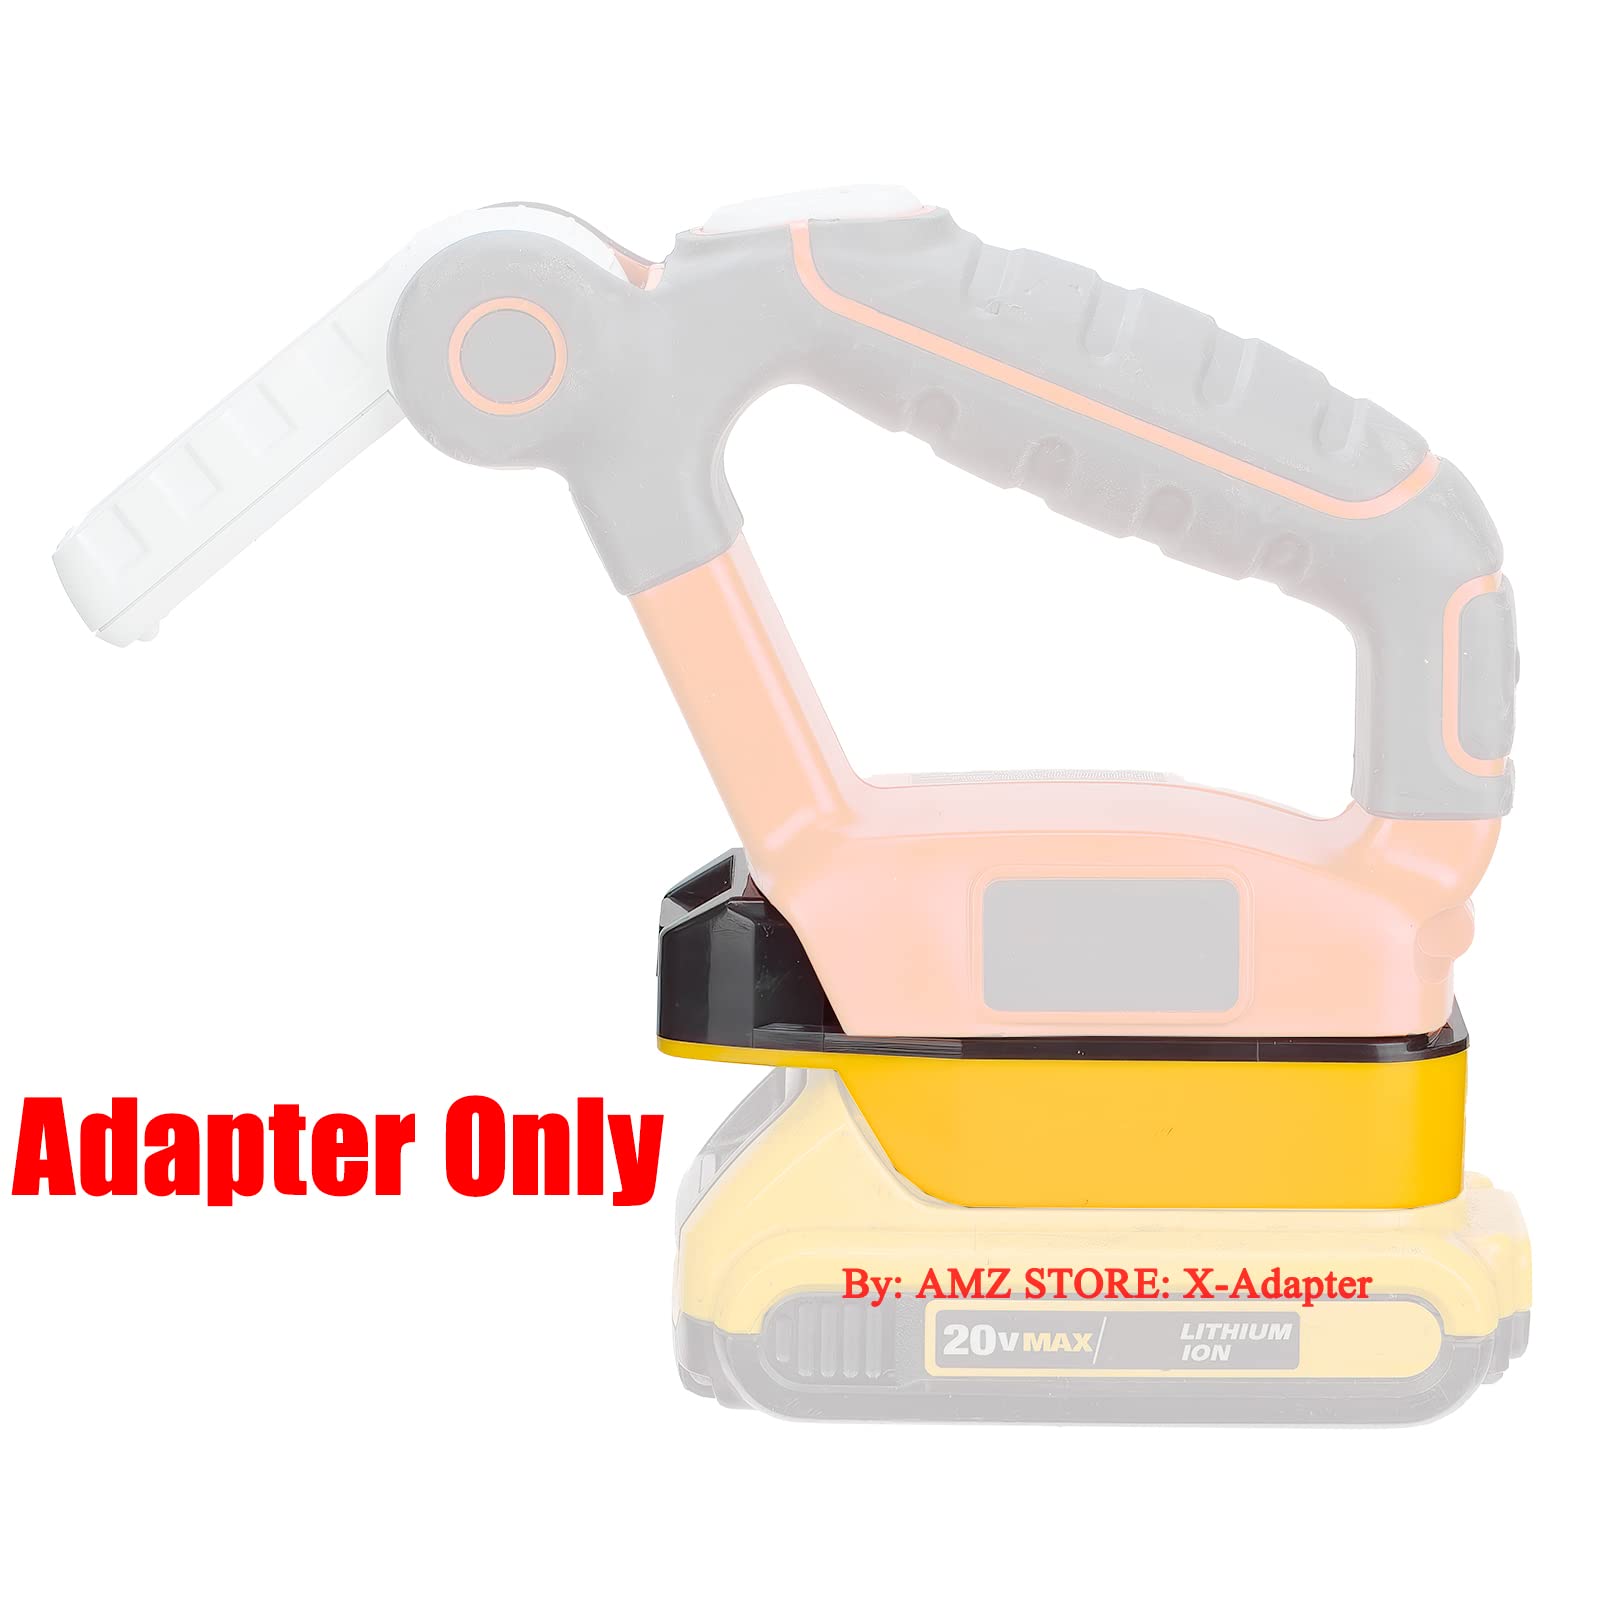 1x Adapter Only Fits Black & Decker Fits Porter Cable 20v MAX (Not Old 18v) Tools Compatible with DeWalt 20v MAX Li-Ion Battery - Adapter Only